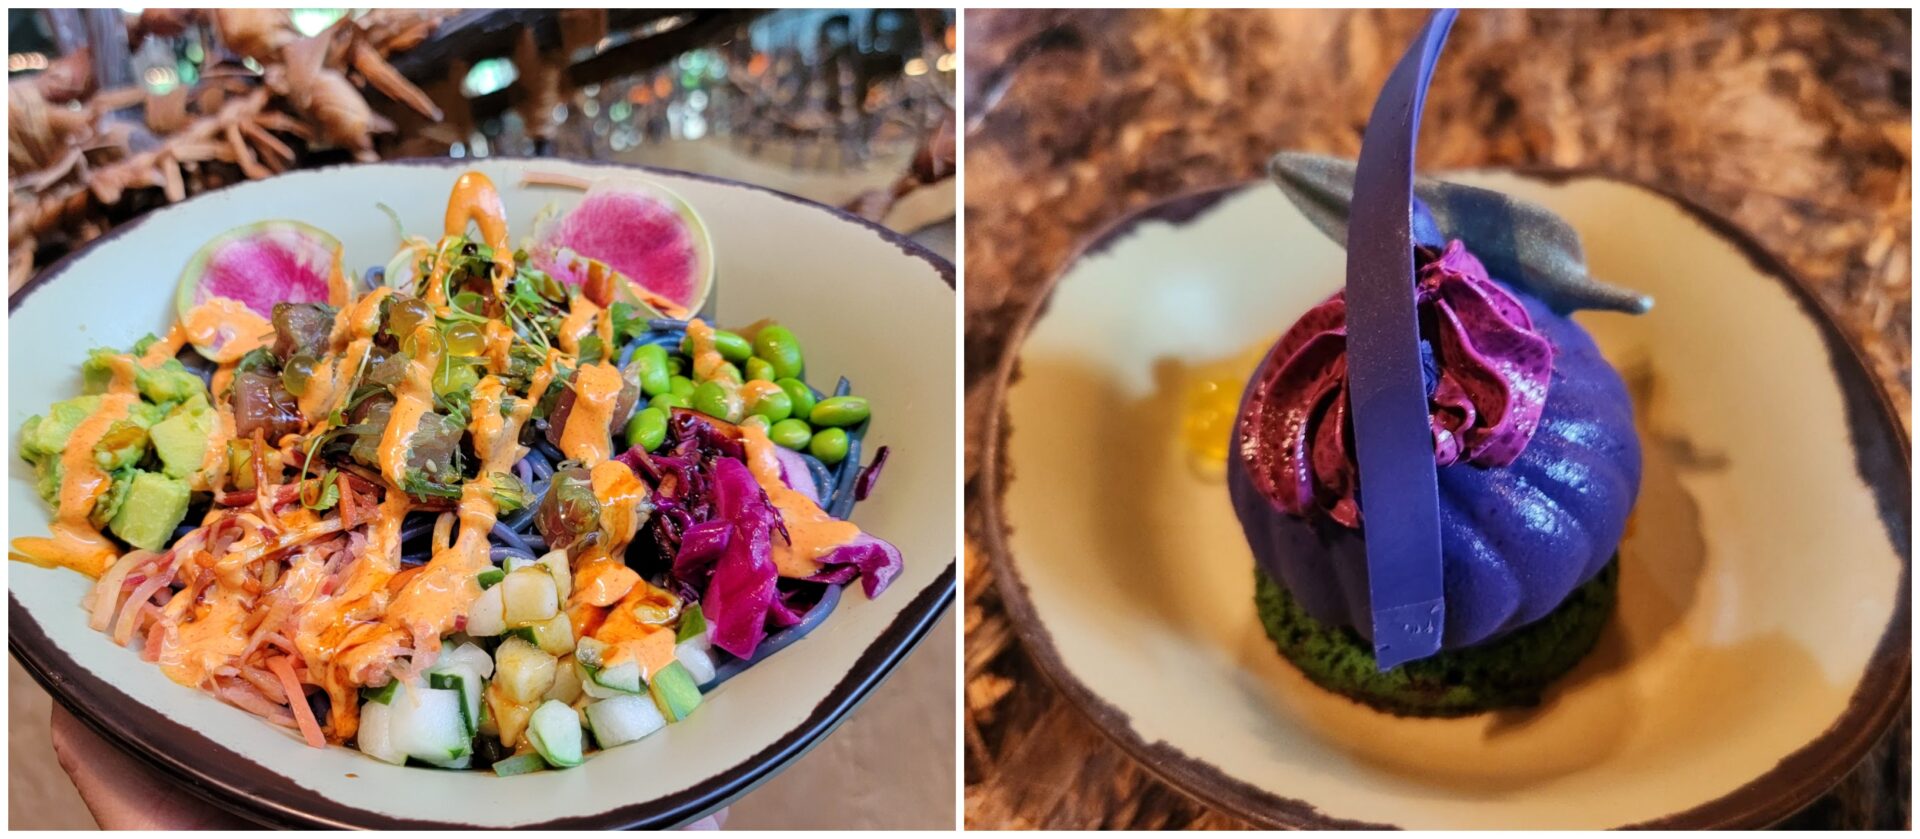 Dig Into this NEW Ocean Moon Bowl and Metkayina Mousse at Satu’li Canteen